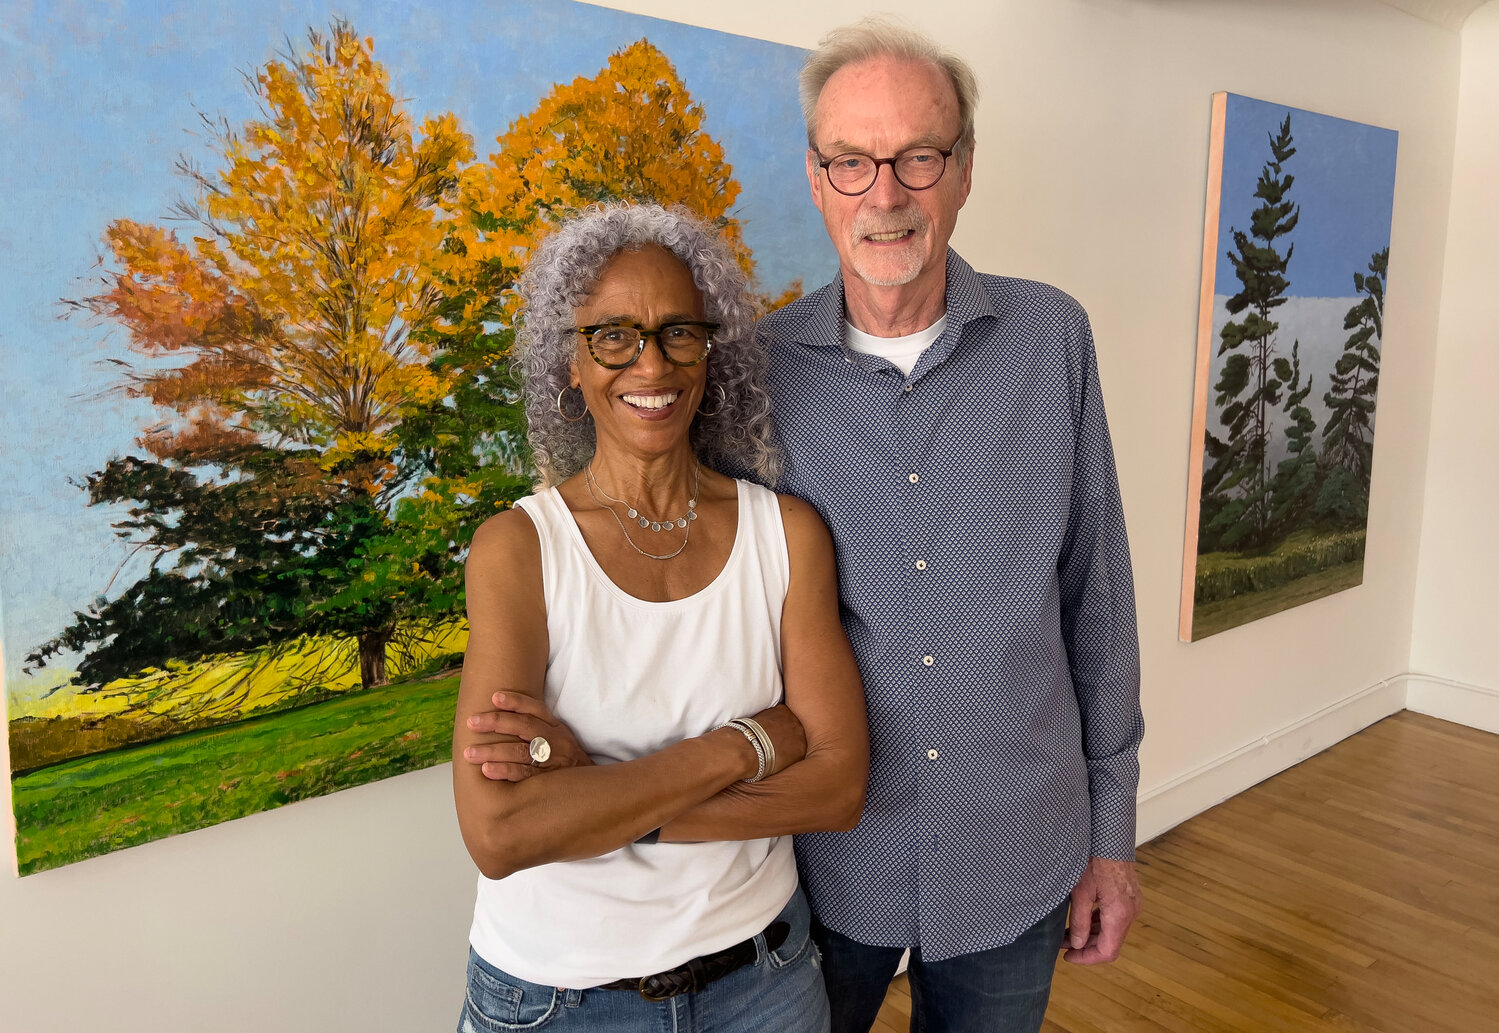 Artist Peter Devine and wife, Nancy, owner of Gallery 57 By The Bay. The gallery celebrated a grand opening this past weekend and the first exhibit features work from Peter.